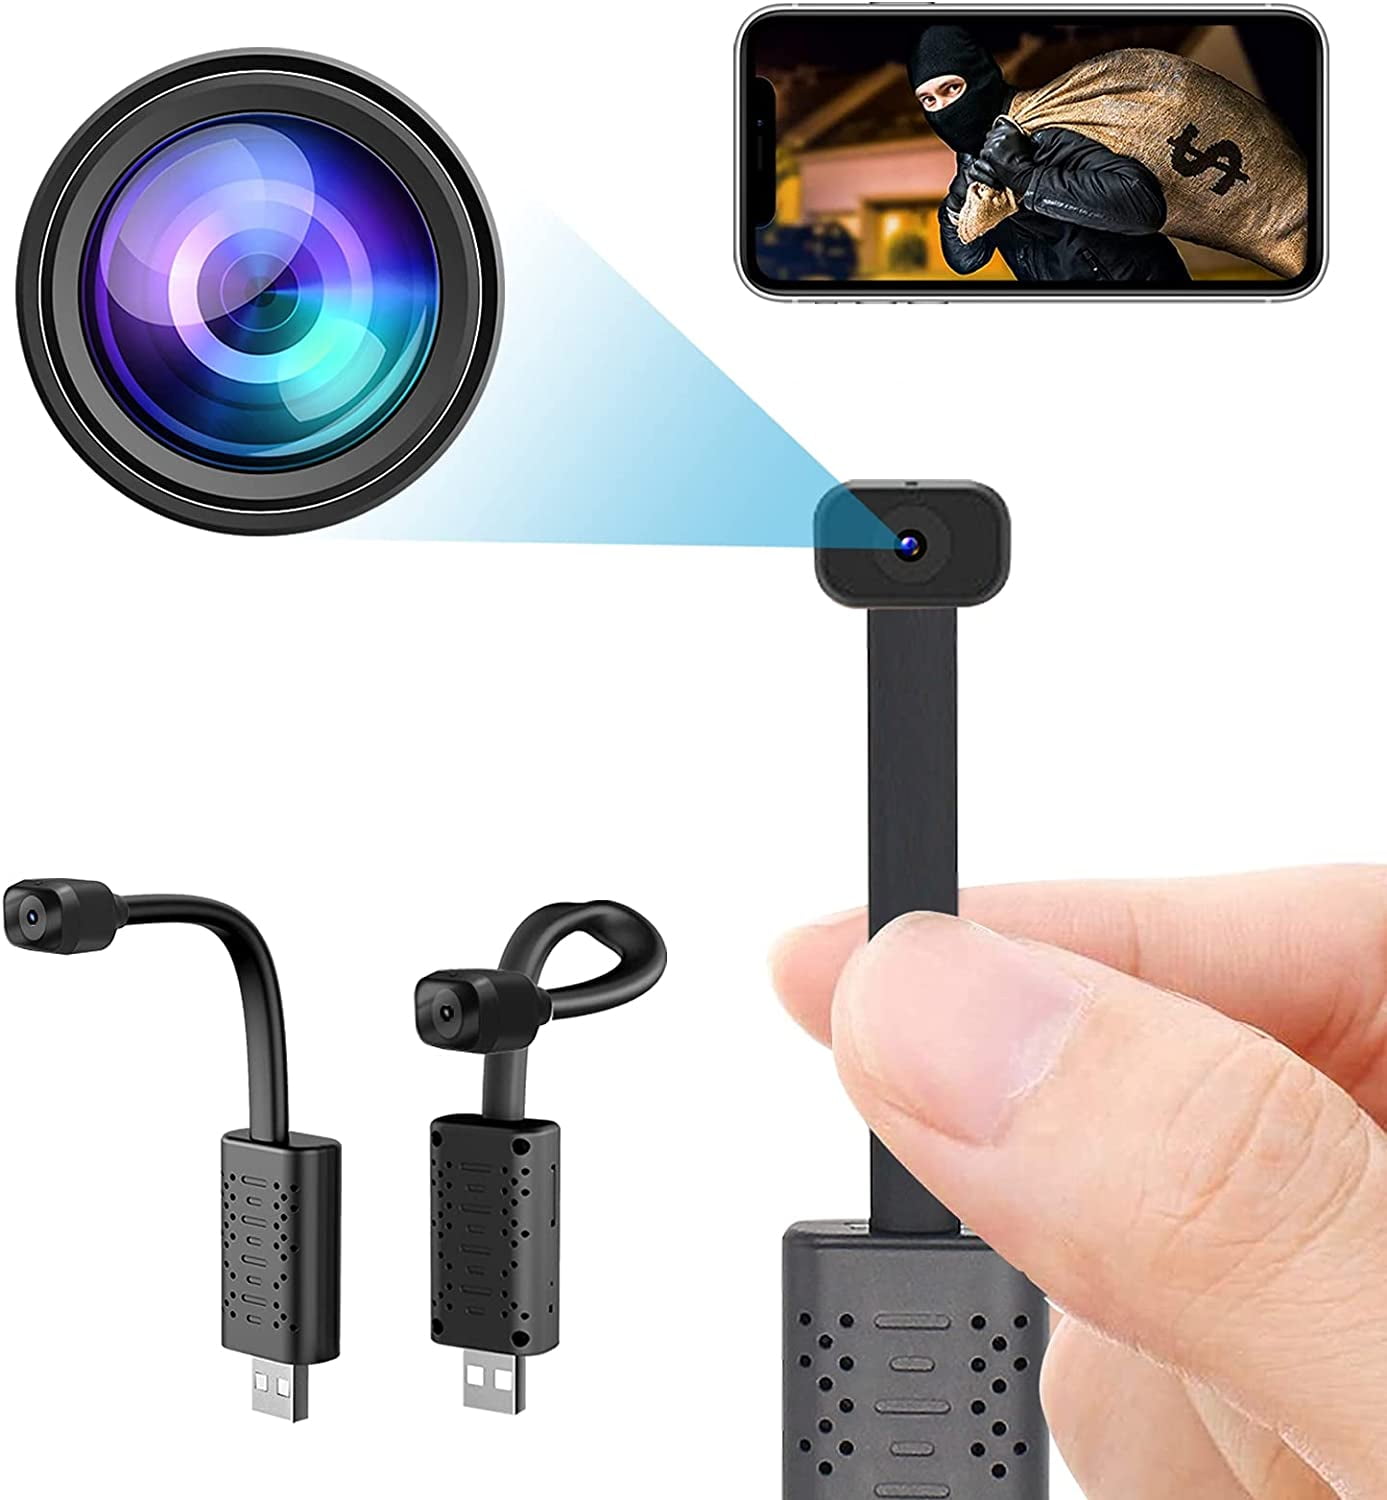 Smallest USB Camera WiFi,USB Plug Camera,HD 1080P USB Camera Security Surveillance with App Live Streaming, Motion Detection, Night Vision,Cloud Storage for Home/Office/Indoor Support iOS/Android...